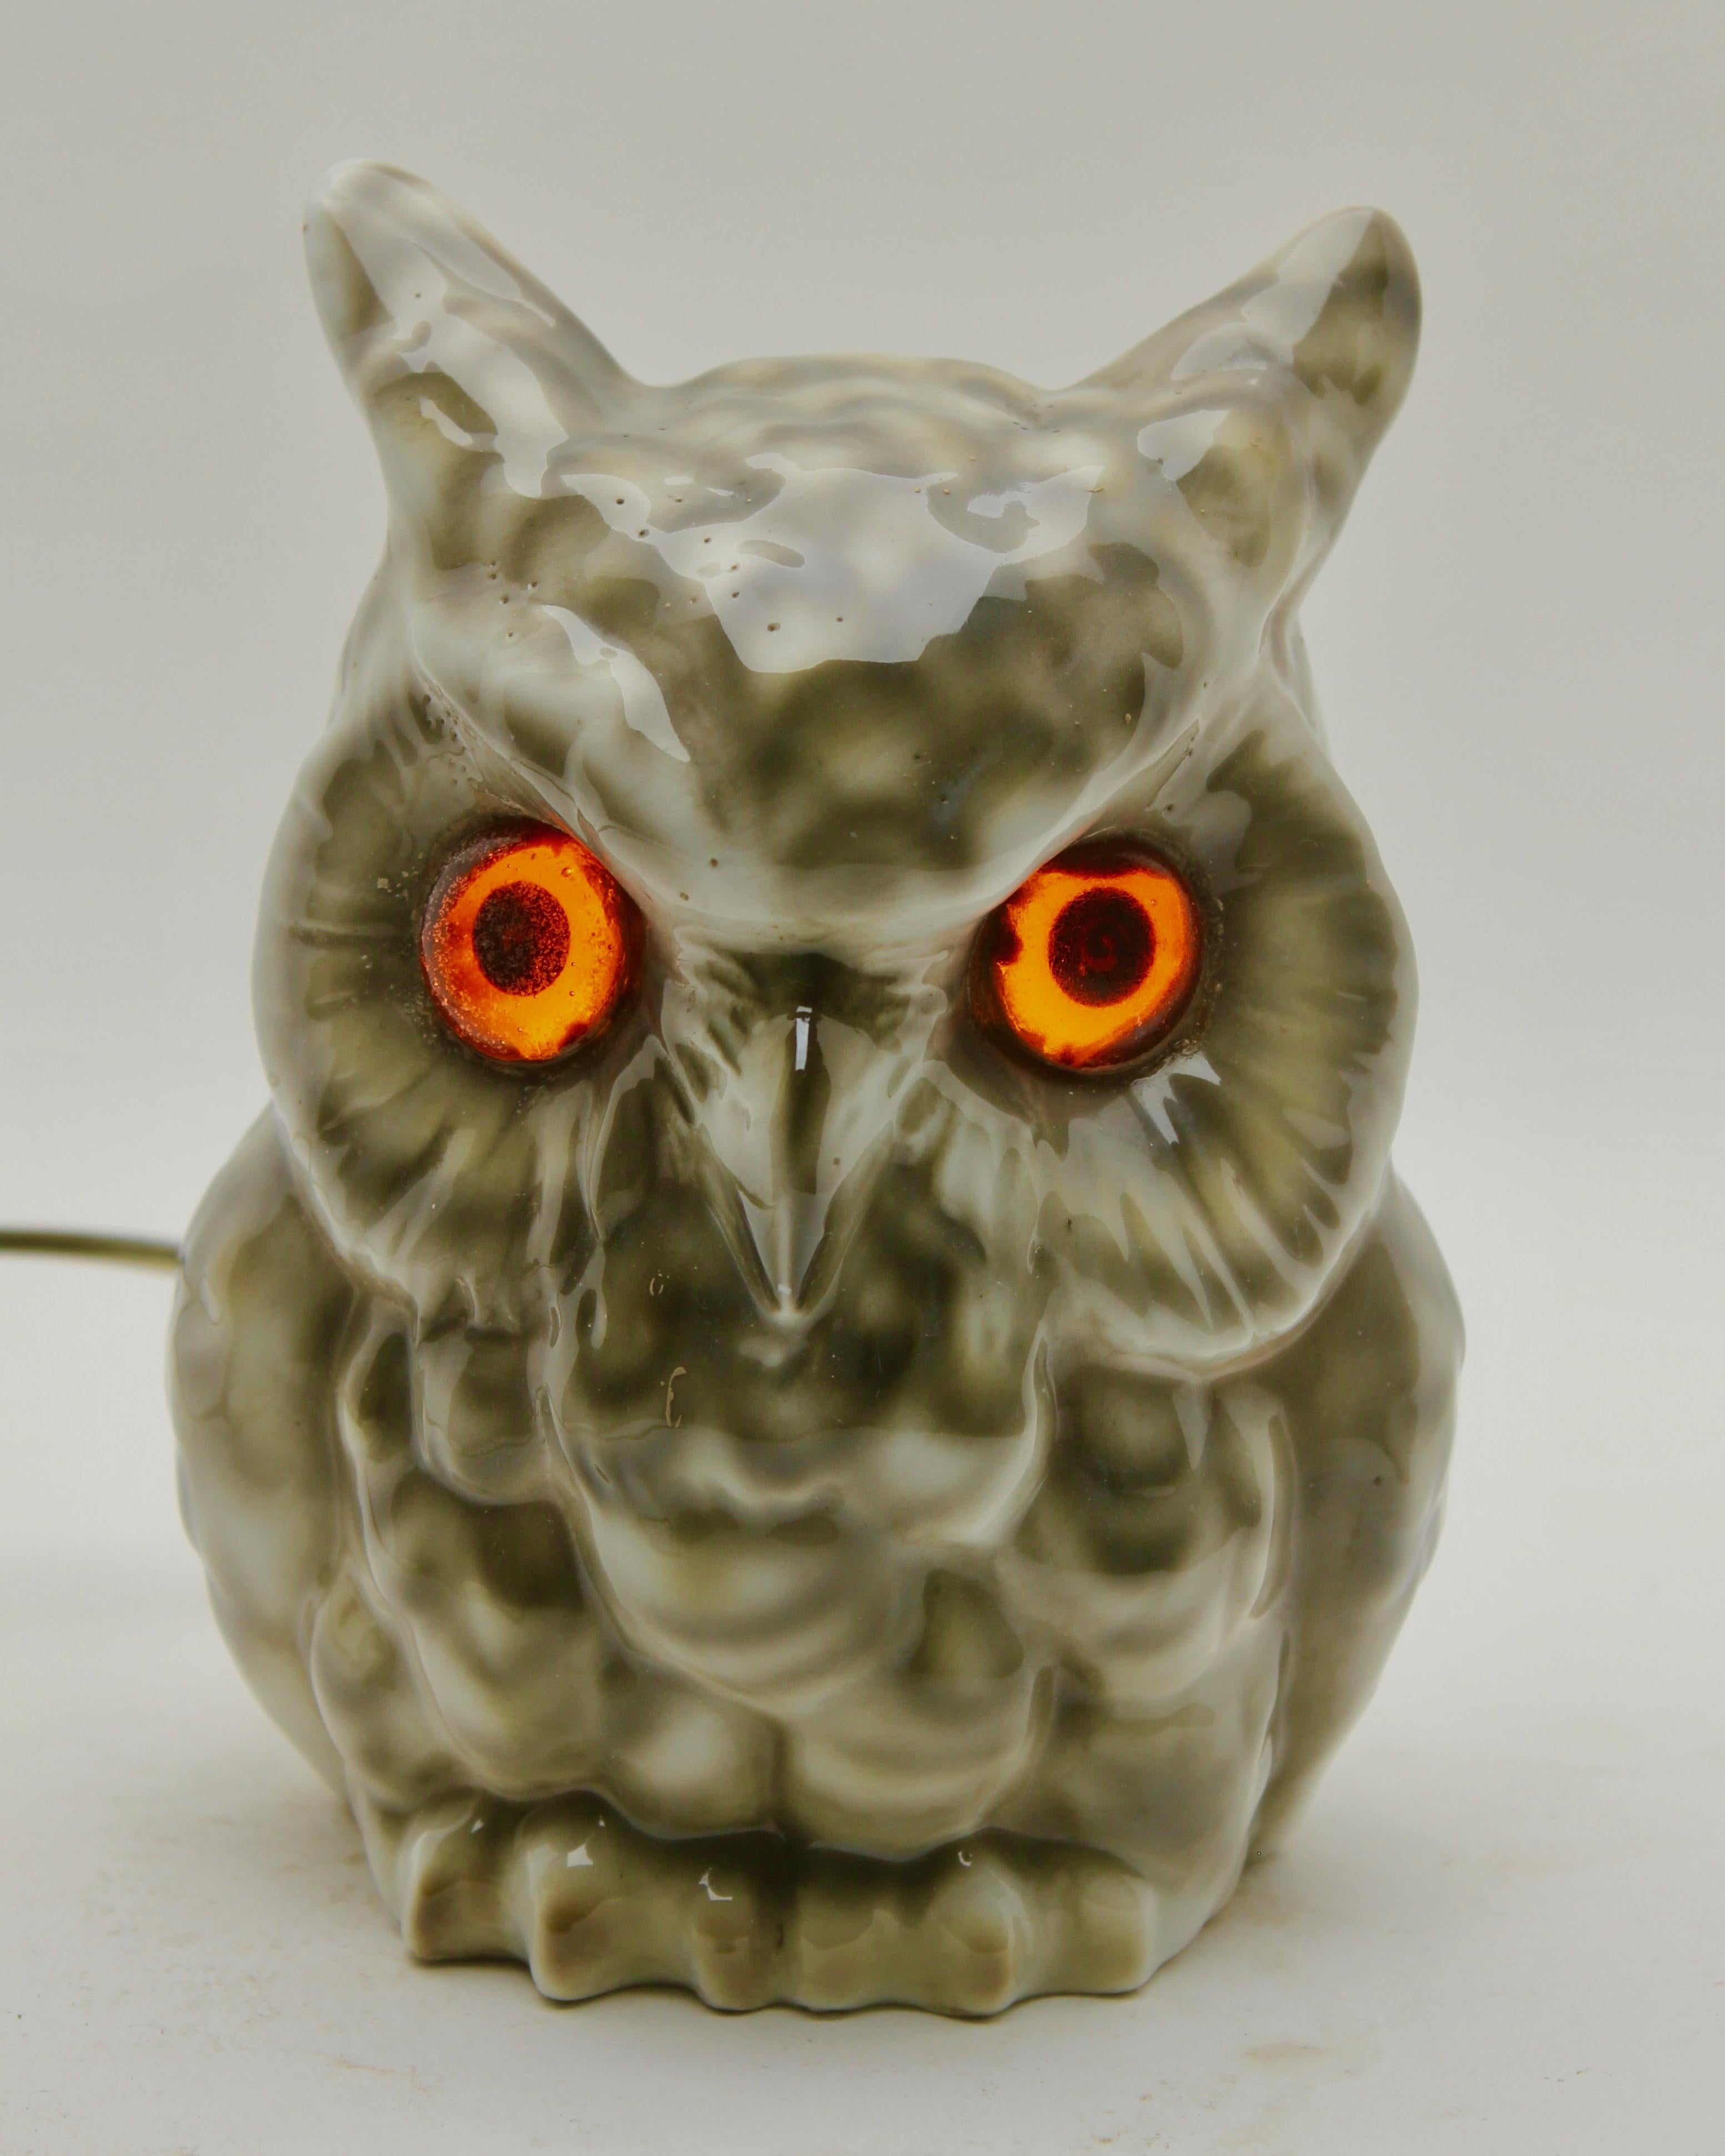 Hand-Crafted Porcelain Figurine Owl, Table Lamp, 'Carl Scheidig Gräfenthal', Germany, 1930s